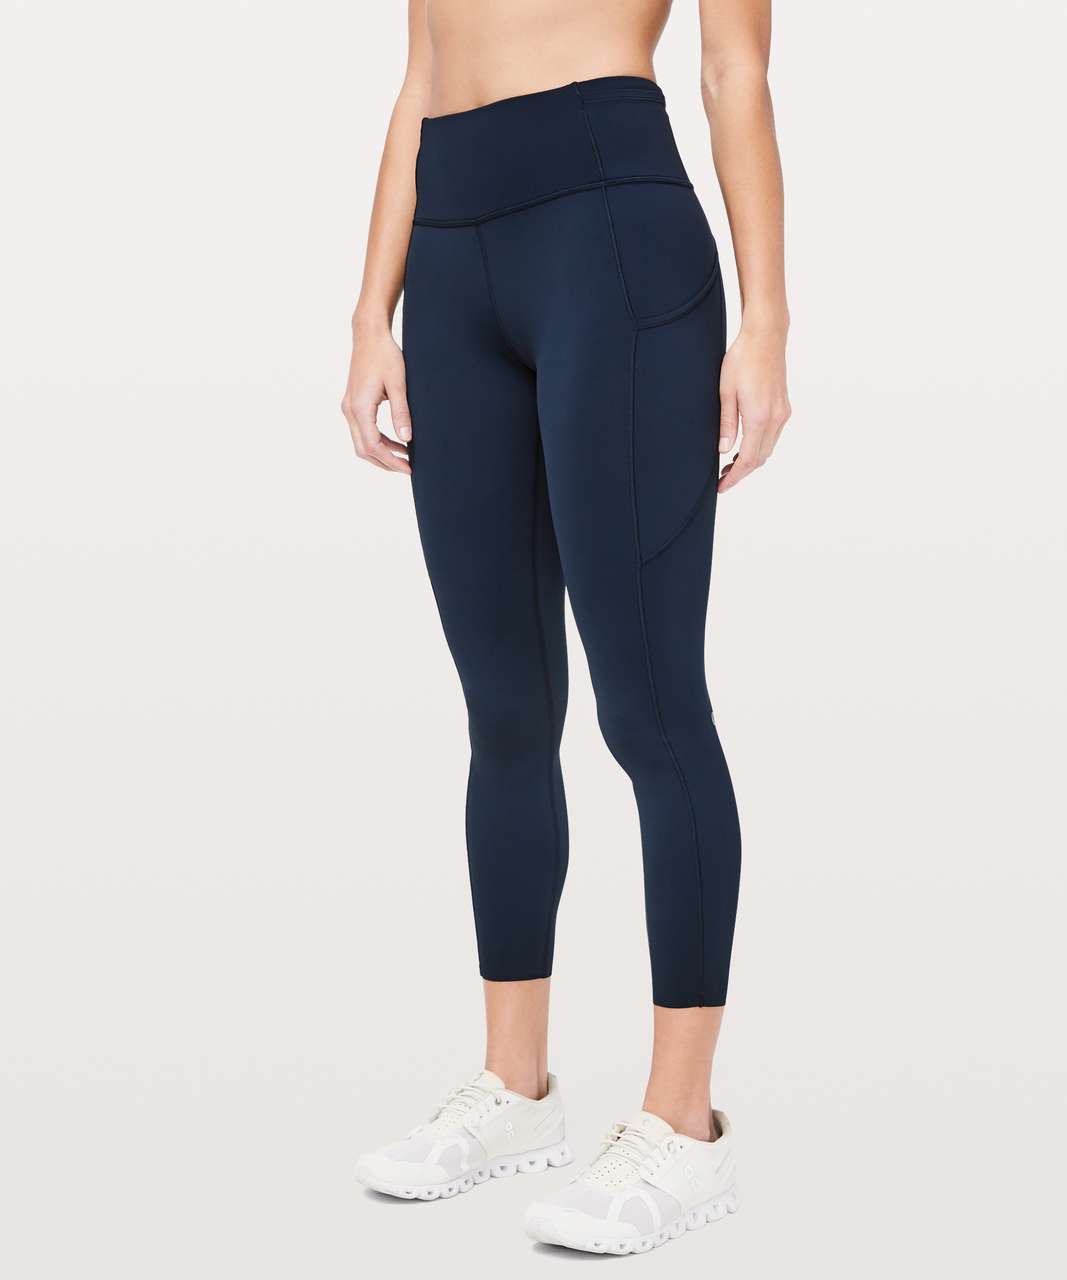 Lululemon Fast and Free Tight II 25 Non-Reflective Nulux Plumful Size 4  W5BXQS